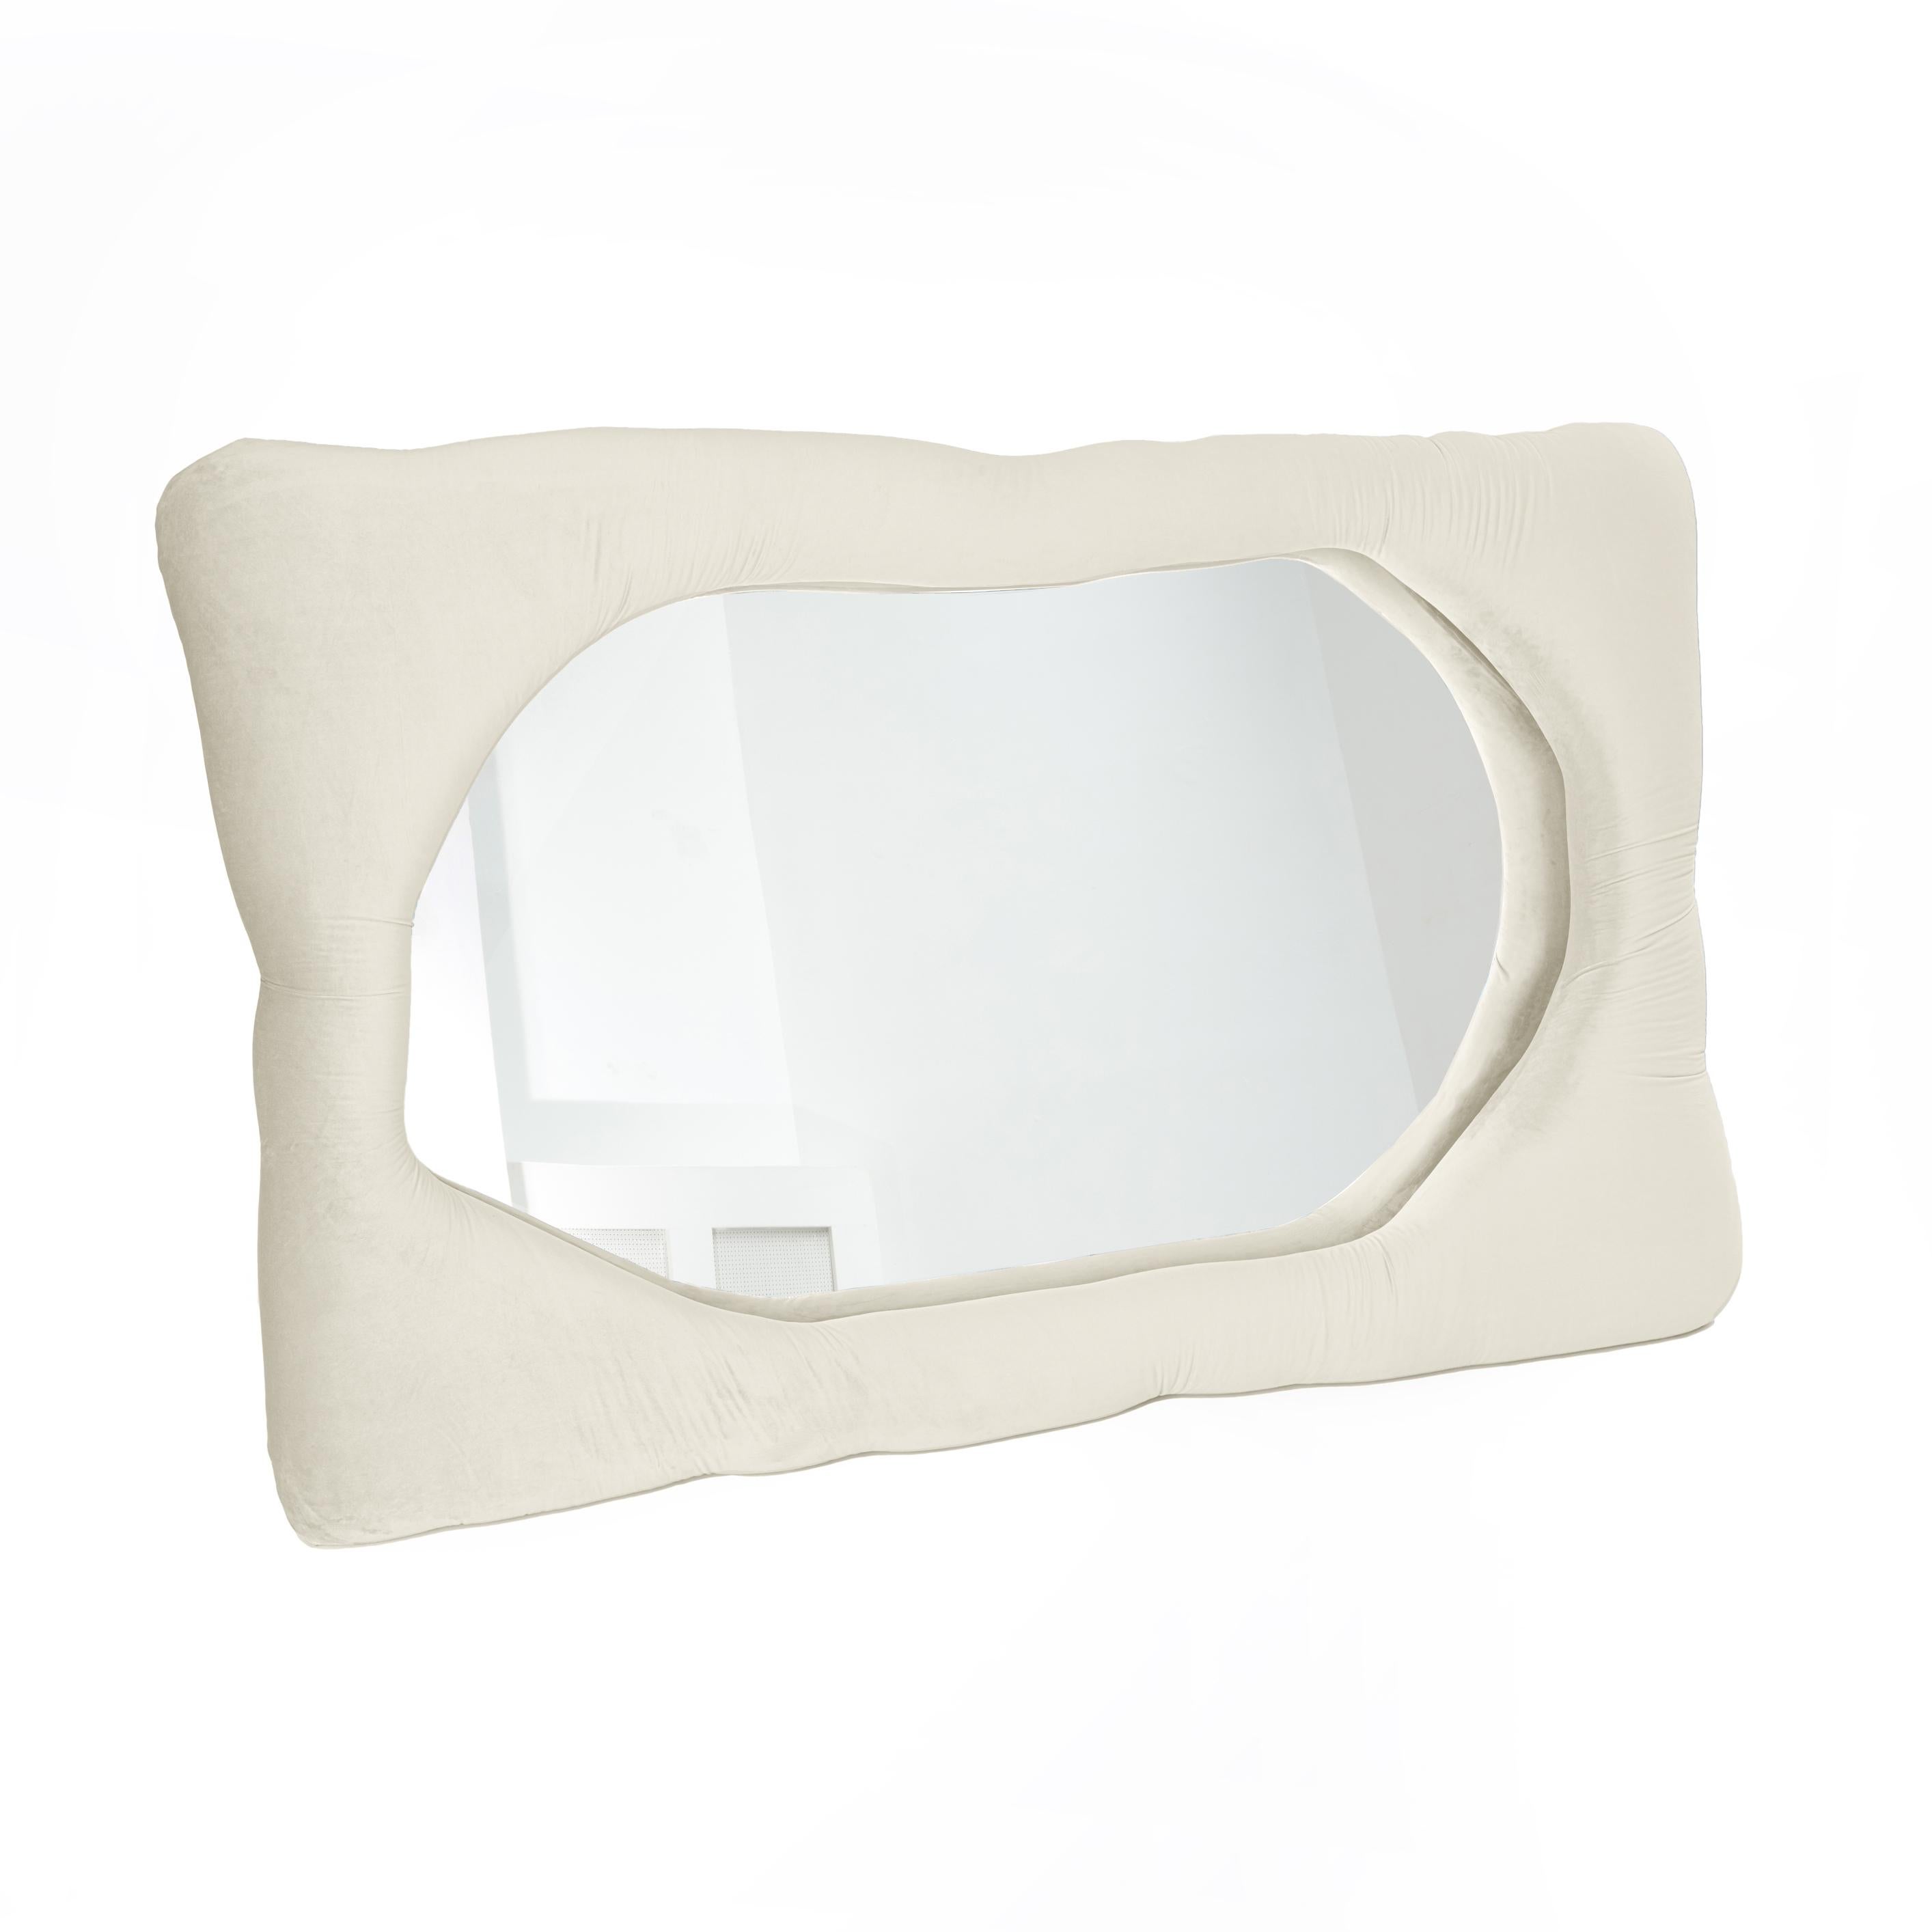 Biomorphic Mirror by Brandi Howe

Velvet fabric, glass, wood

Pictured: 68 x 45 x 5 in.

This mirror is fully customizable in multiple color, fabric and sizing options.

Other size available: 60 x 15 x 5 in.

Lead time for this item is 7-8 weeks.